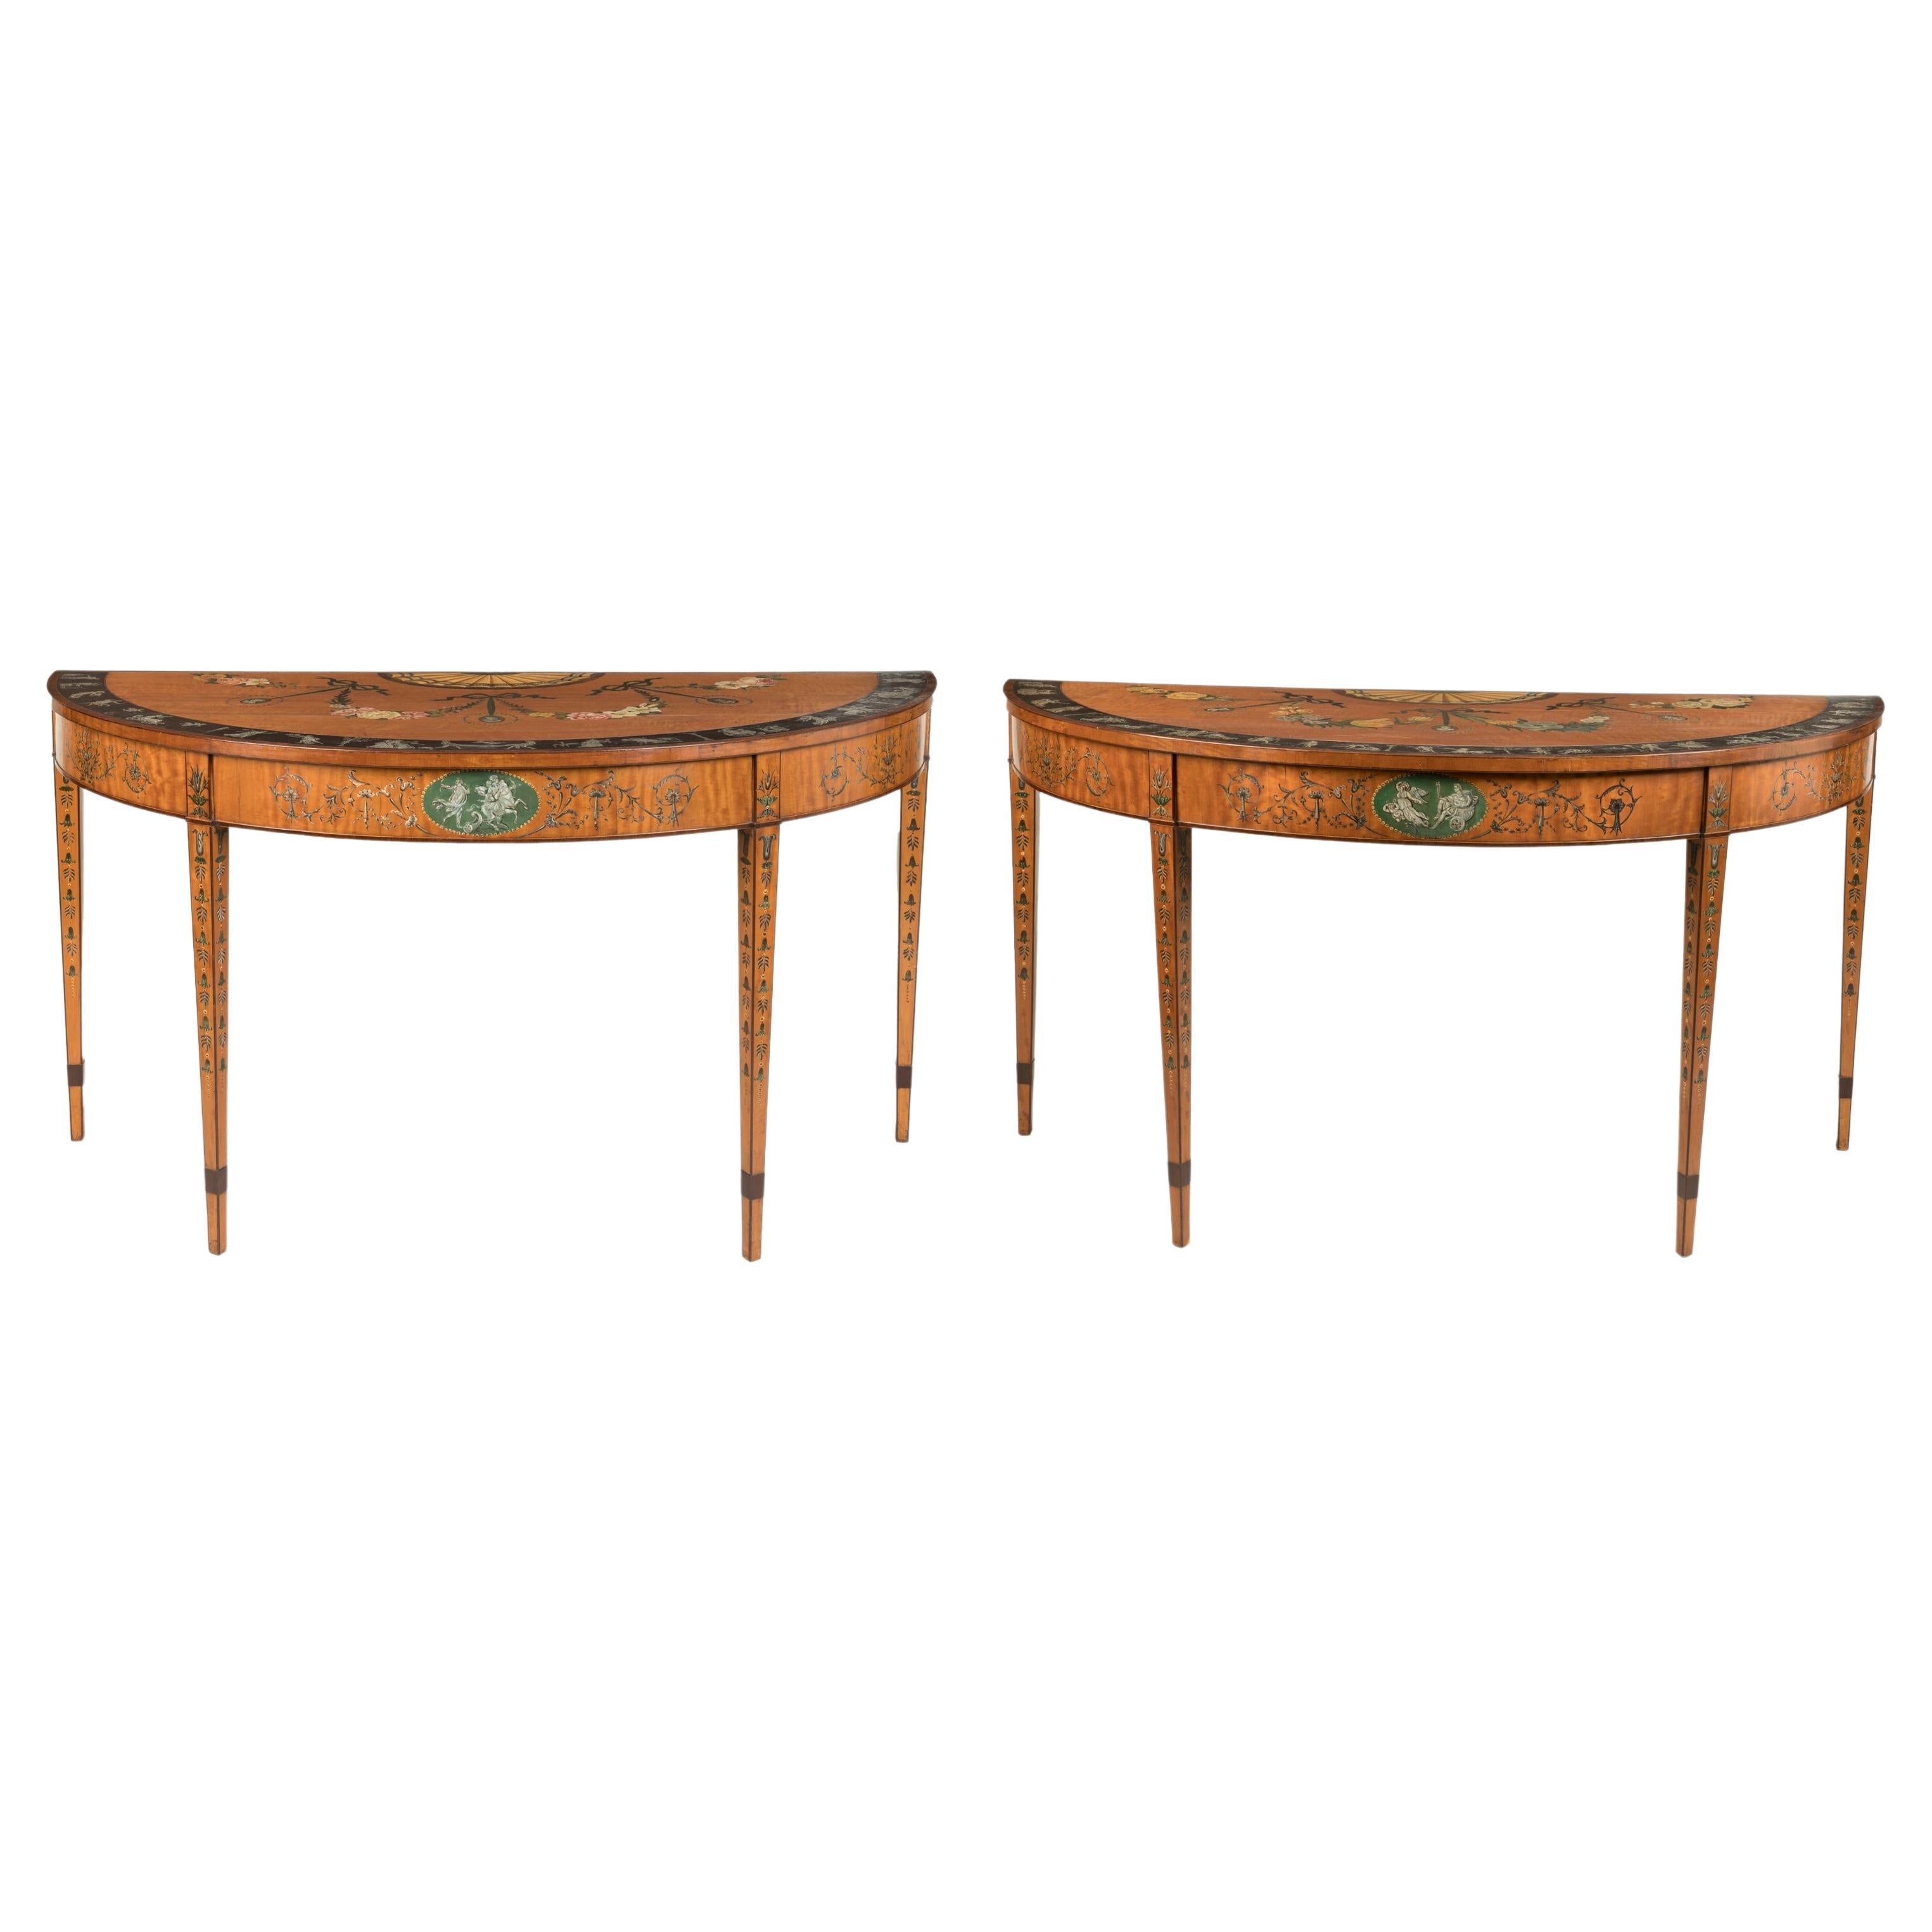 Pair of 19th Century Neoclassical Painted Satinwood Demilune Console Tables